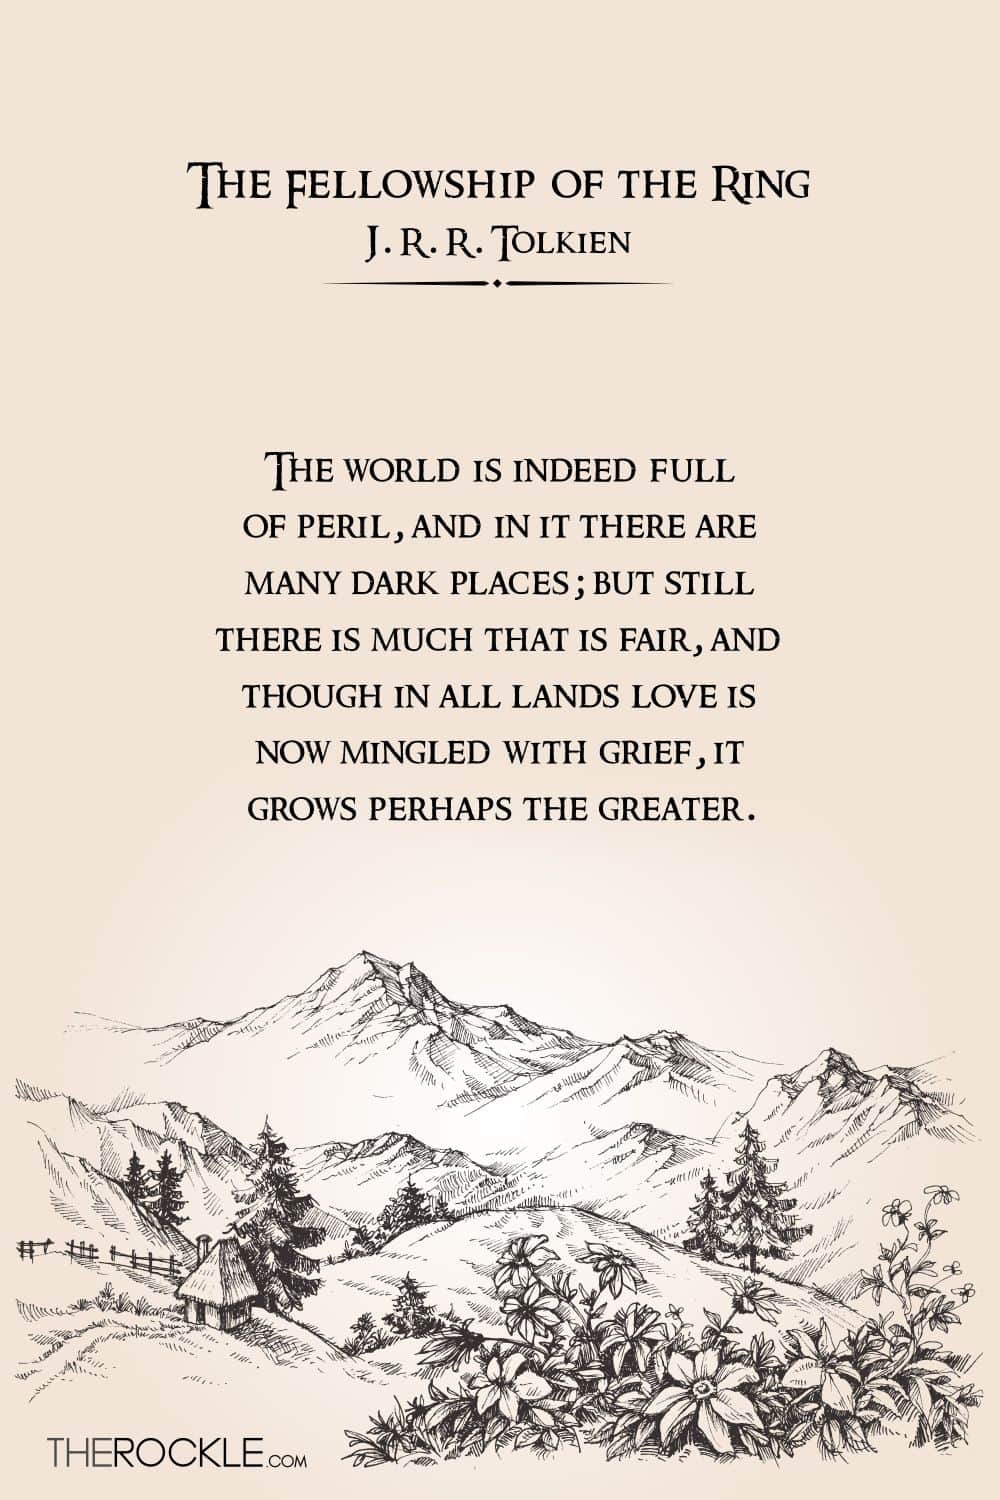 Tolkien on finding hope in a troubled world